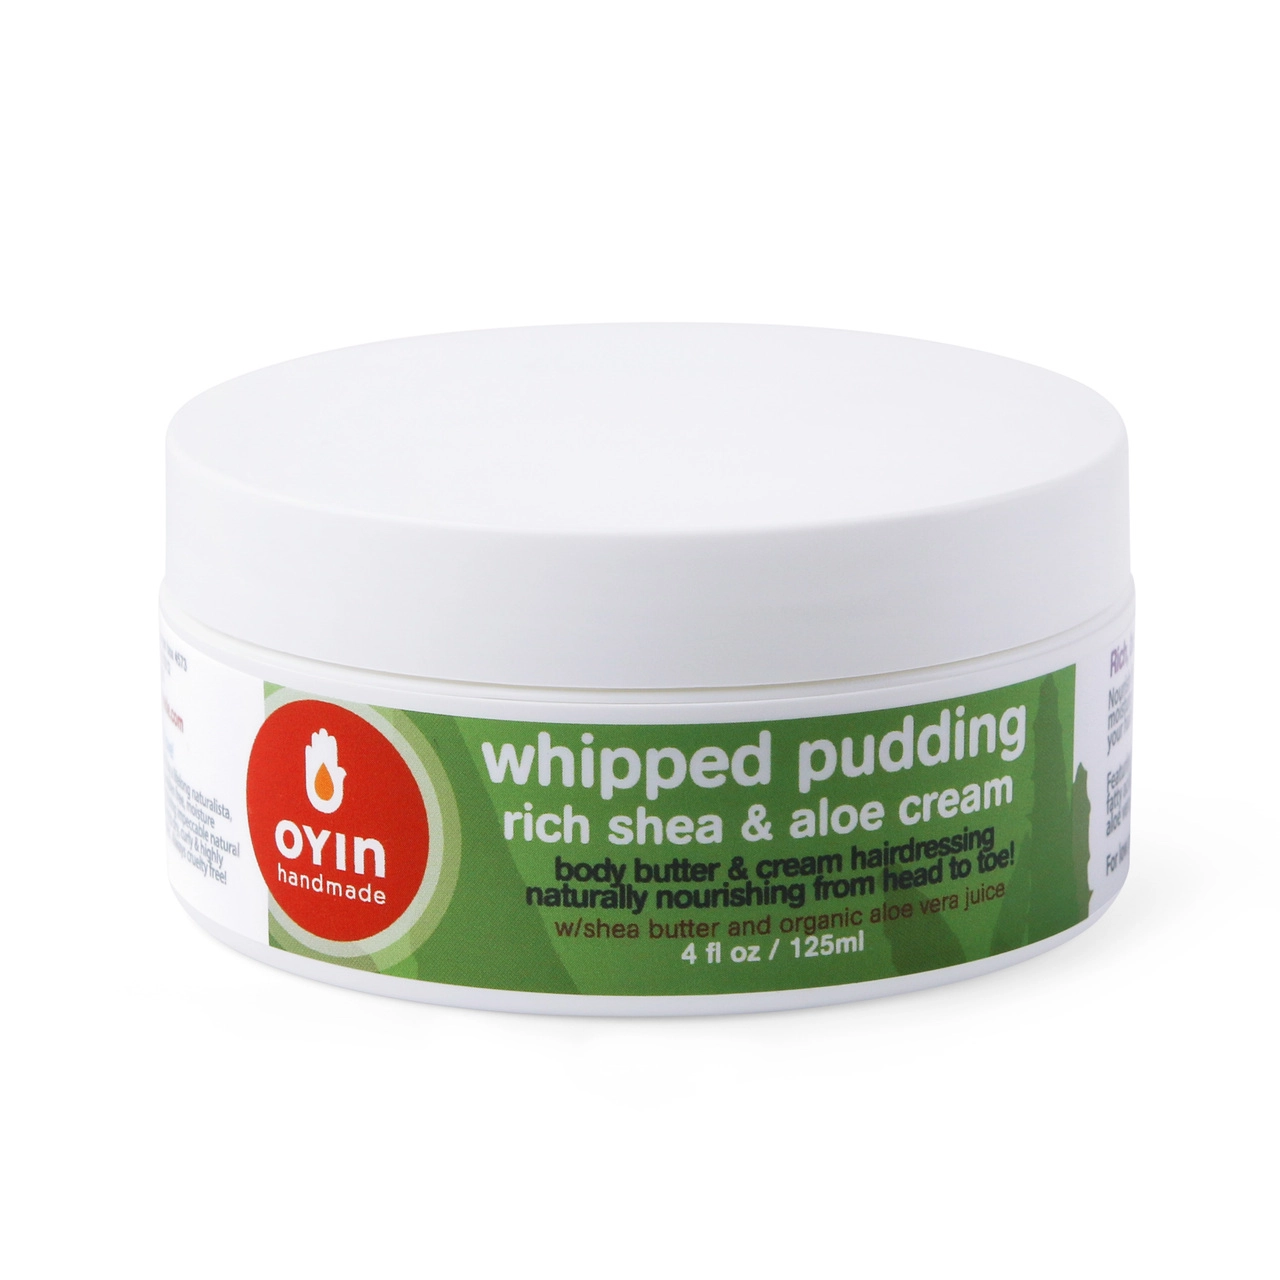 Oyin-Handmade-Whipping-Pudding-Black-Owned-Hair-Product